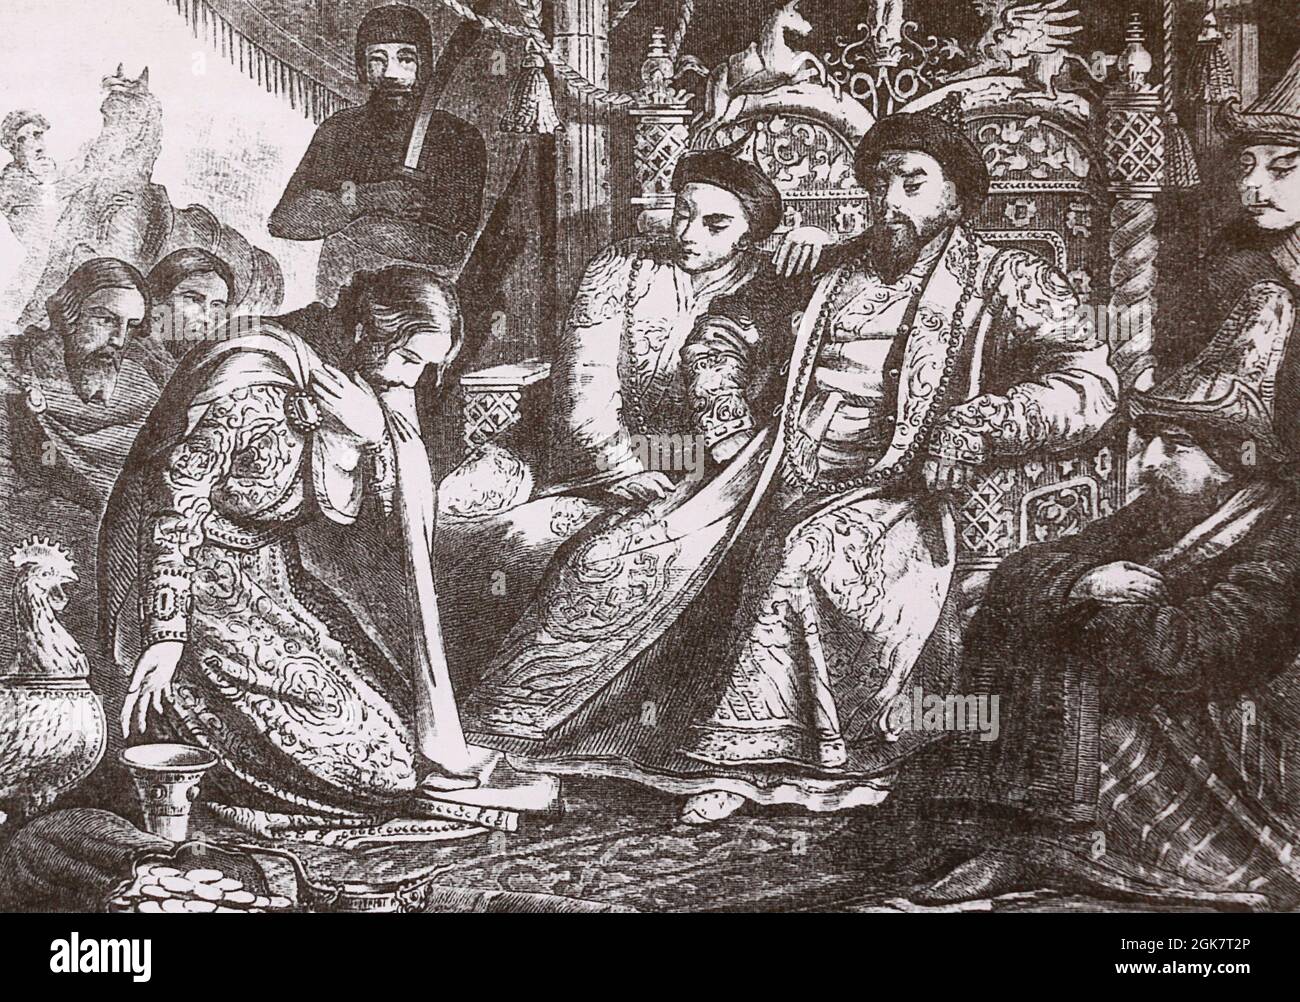 Russian prince at the Tatar headquarters. 19th century engraving. Stock Photo